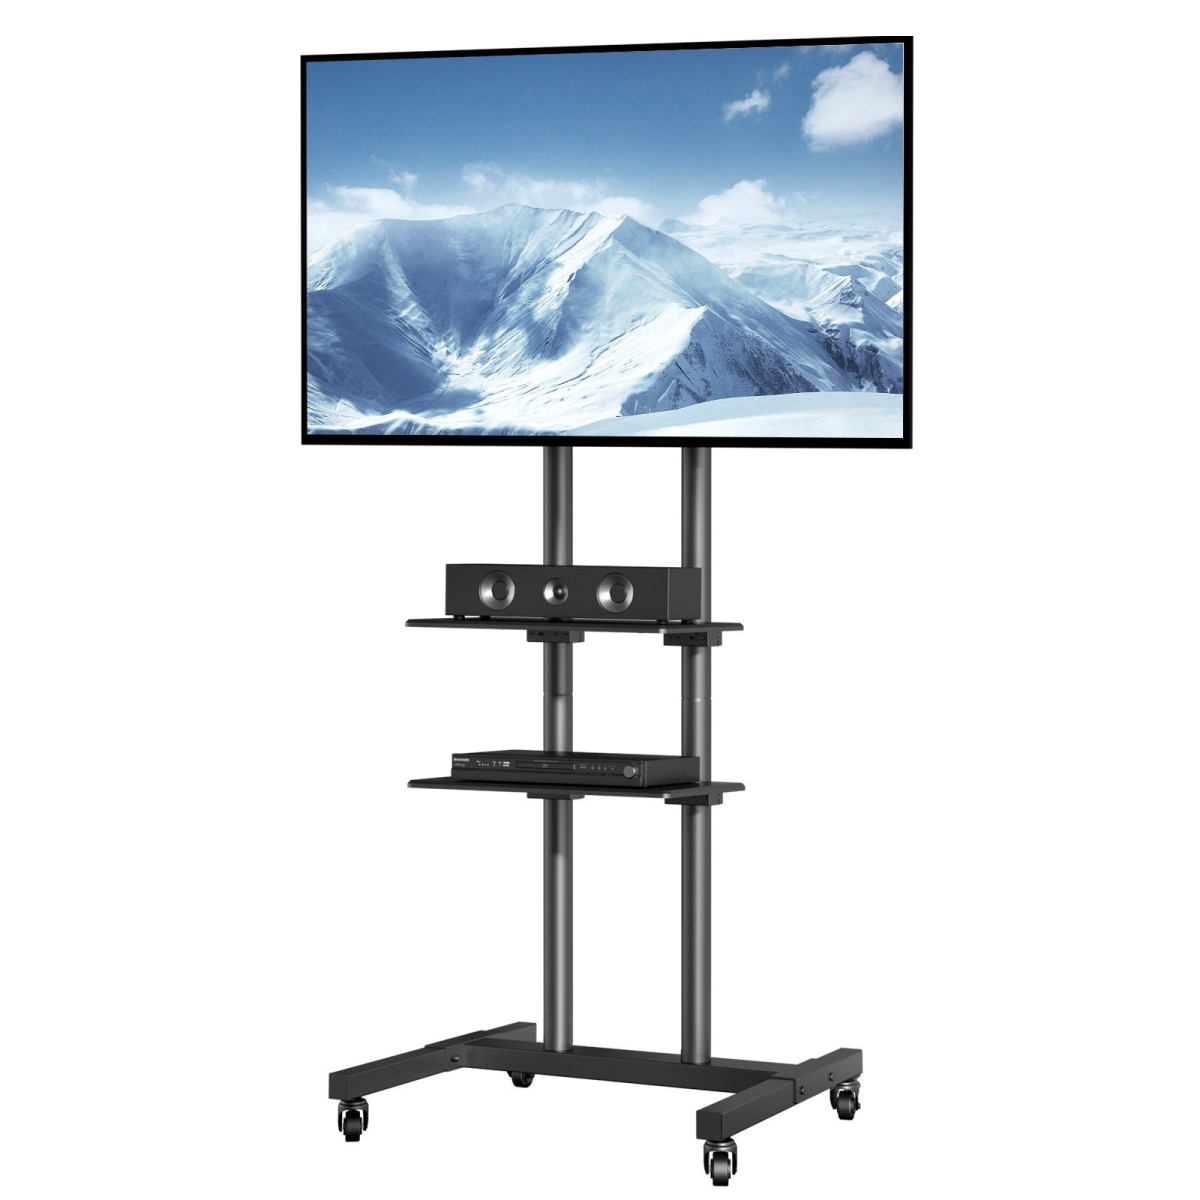 Picture of Vevor LDDSZJKYDLY8557PTV0 Mobile TV Stand Mobile TV Cart for 32-70 in. TVs with Wheels & a Tray